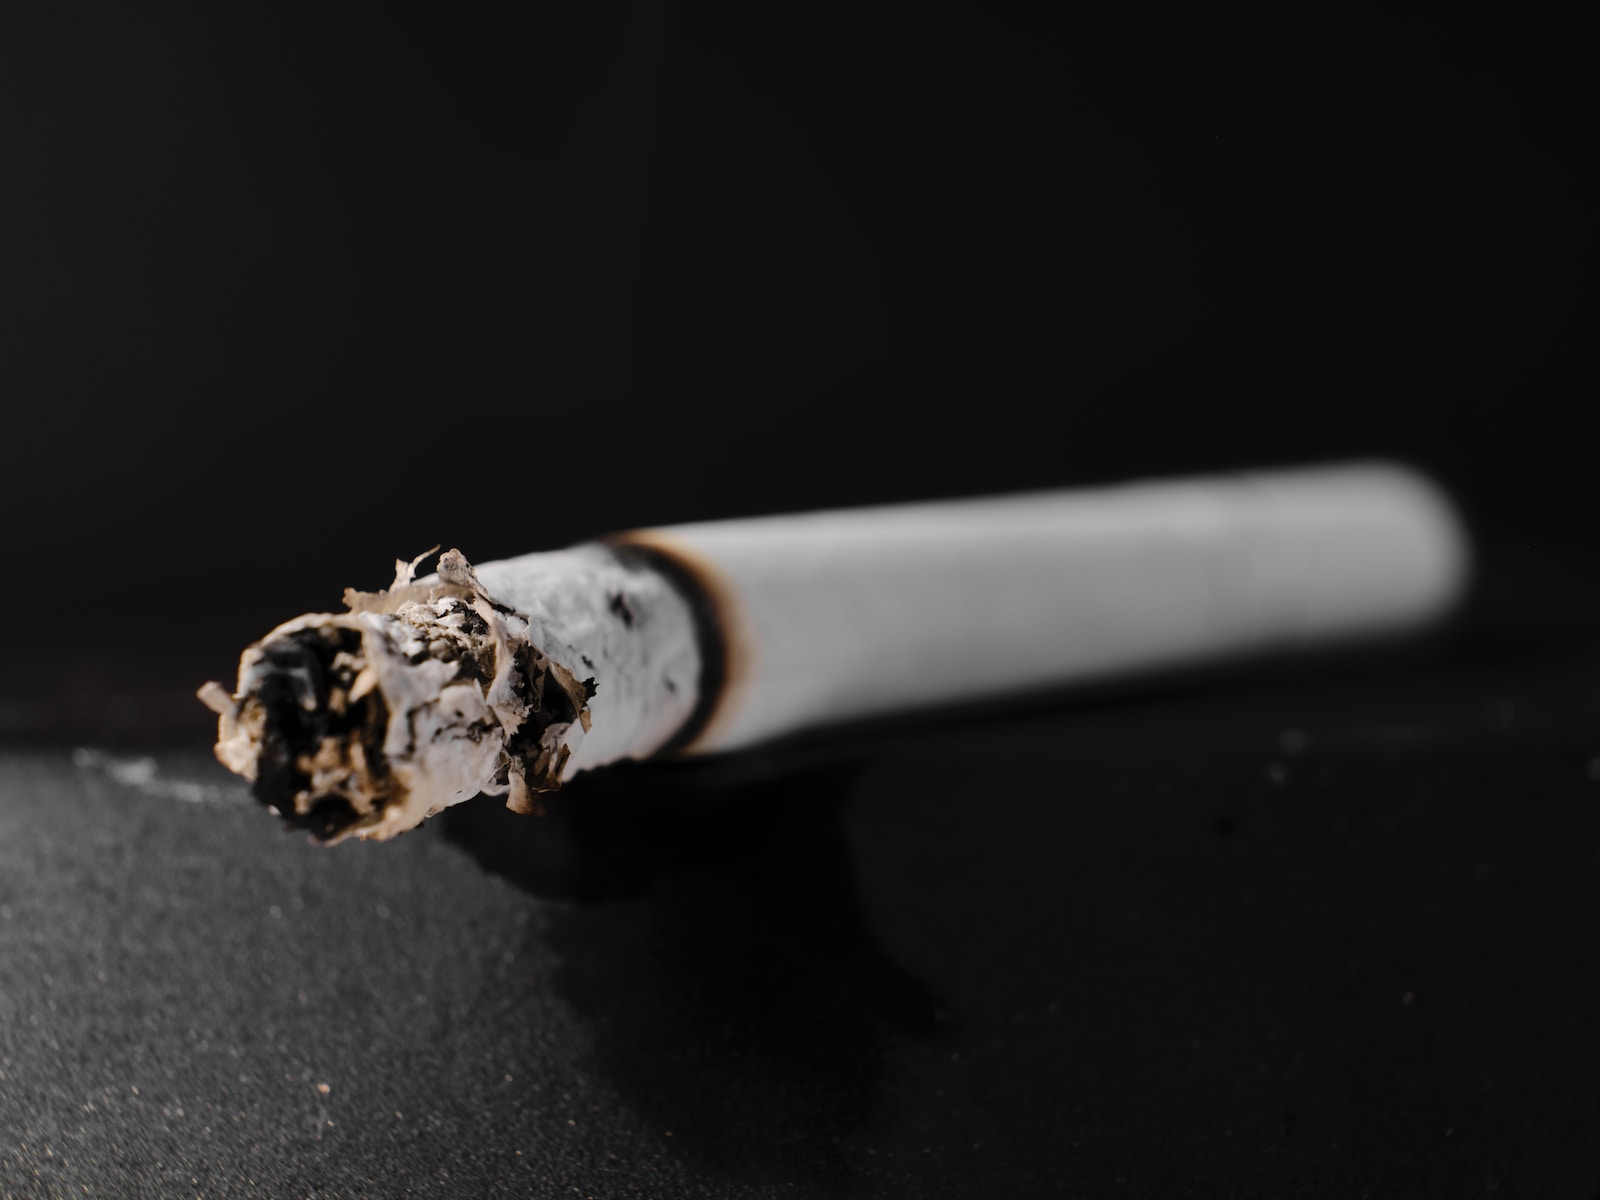 a close up of a cigarette on a table